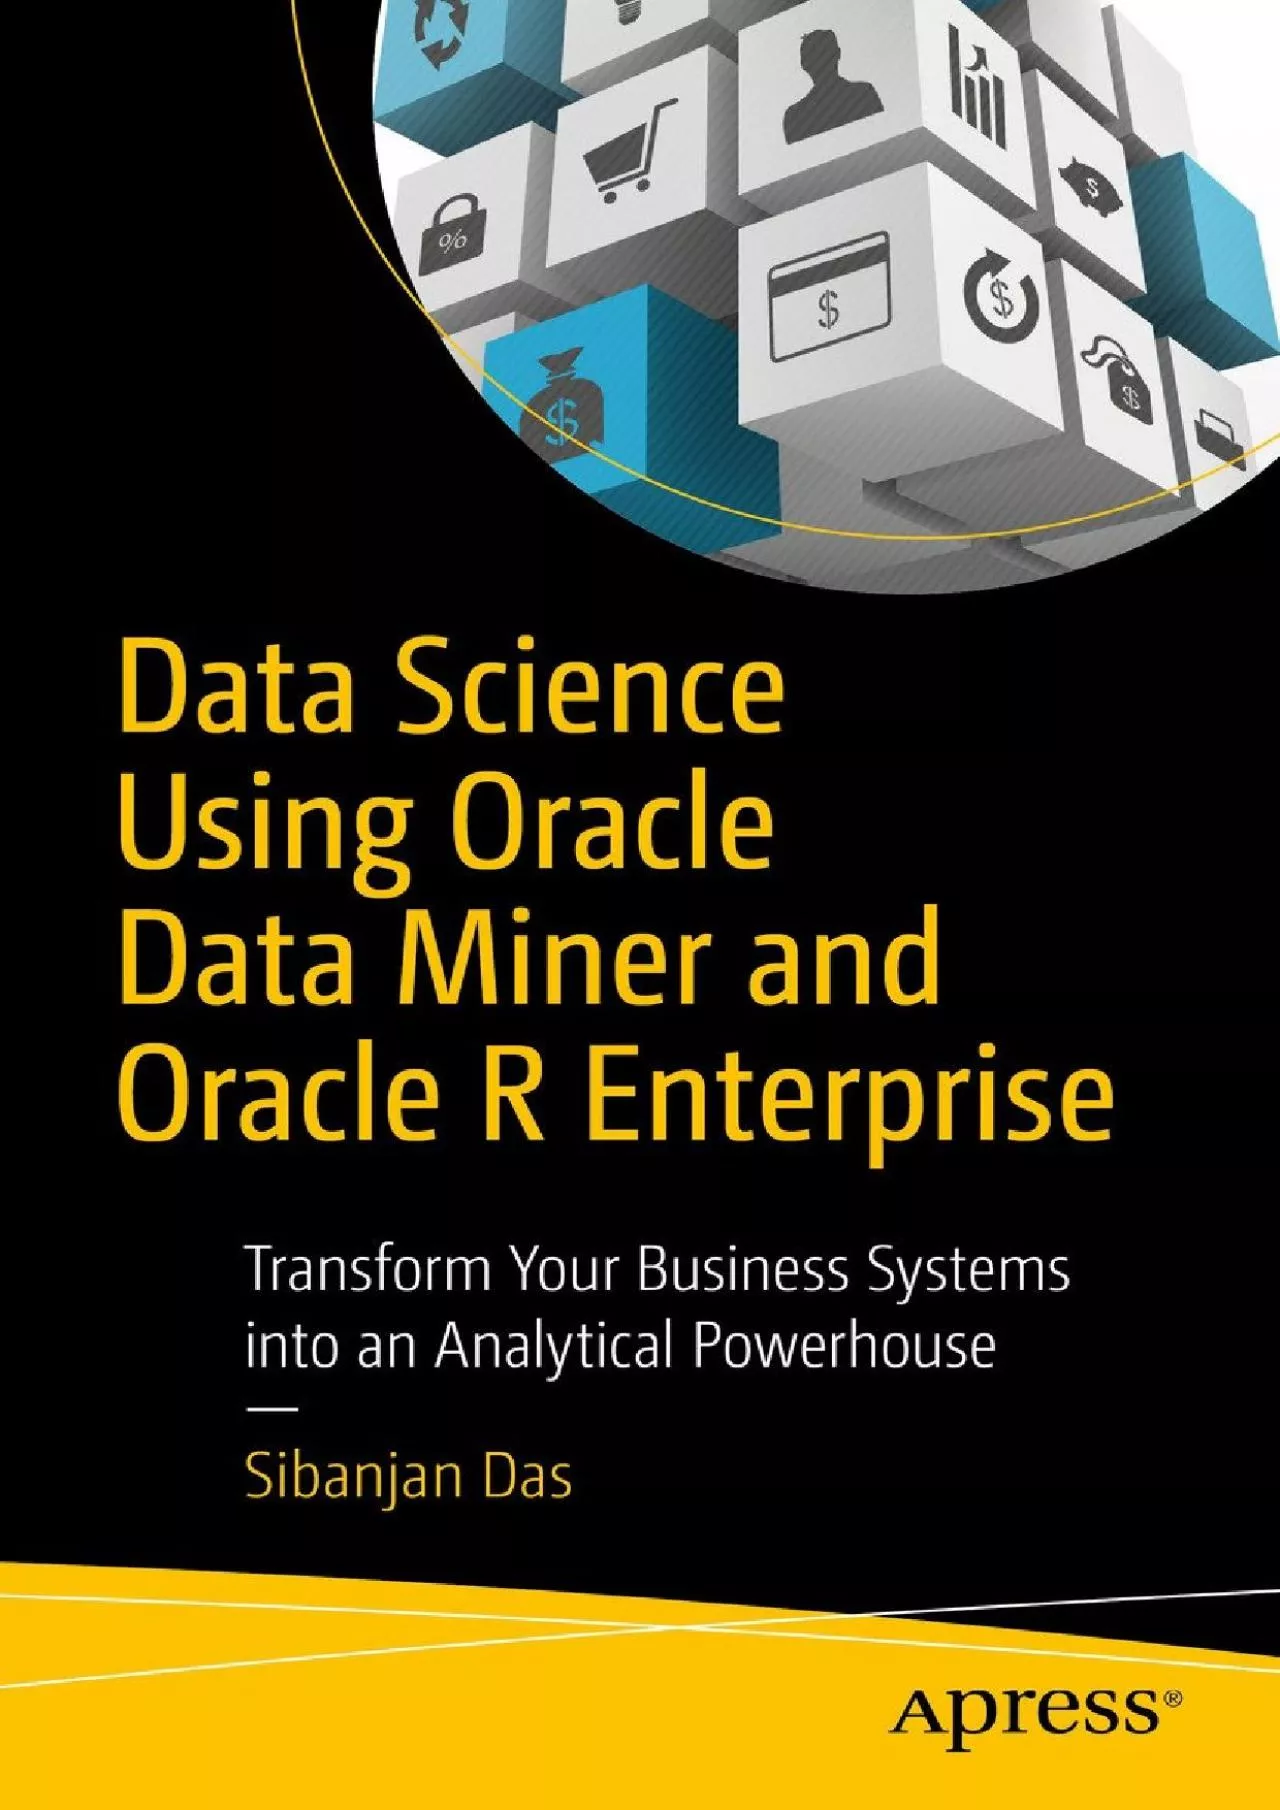 [READING BOOK]-Data Science Using Oracle Data Miner and Oracle R Enterprise: Transform